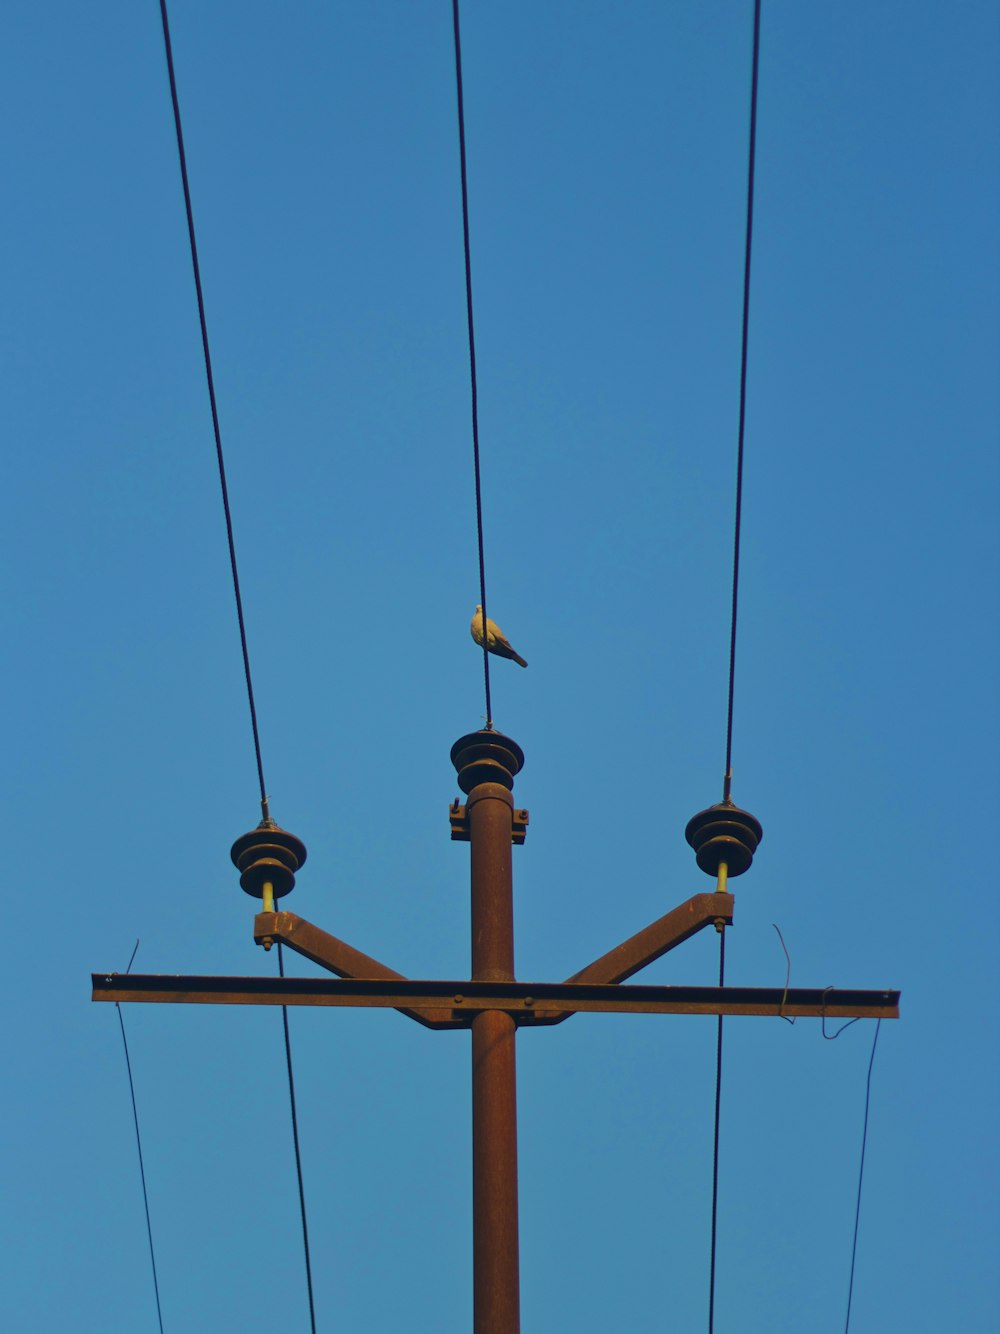 a bird is sitting on top of a pole